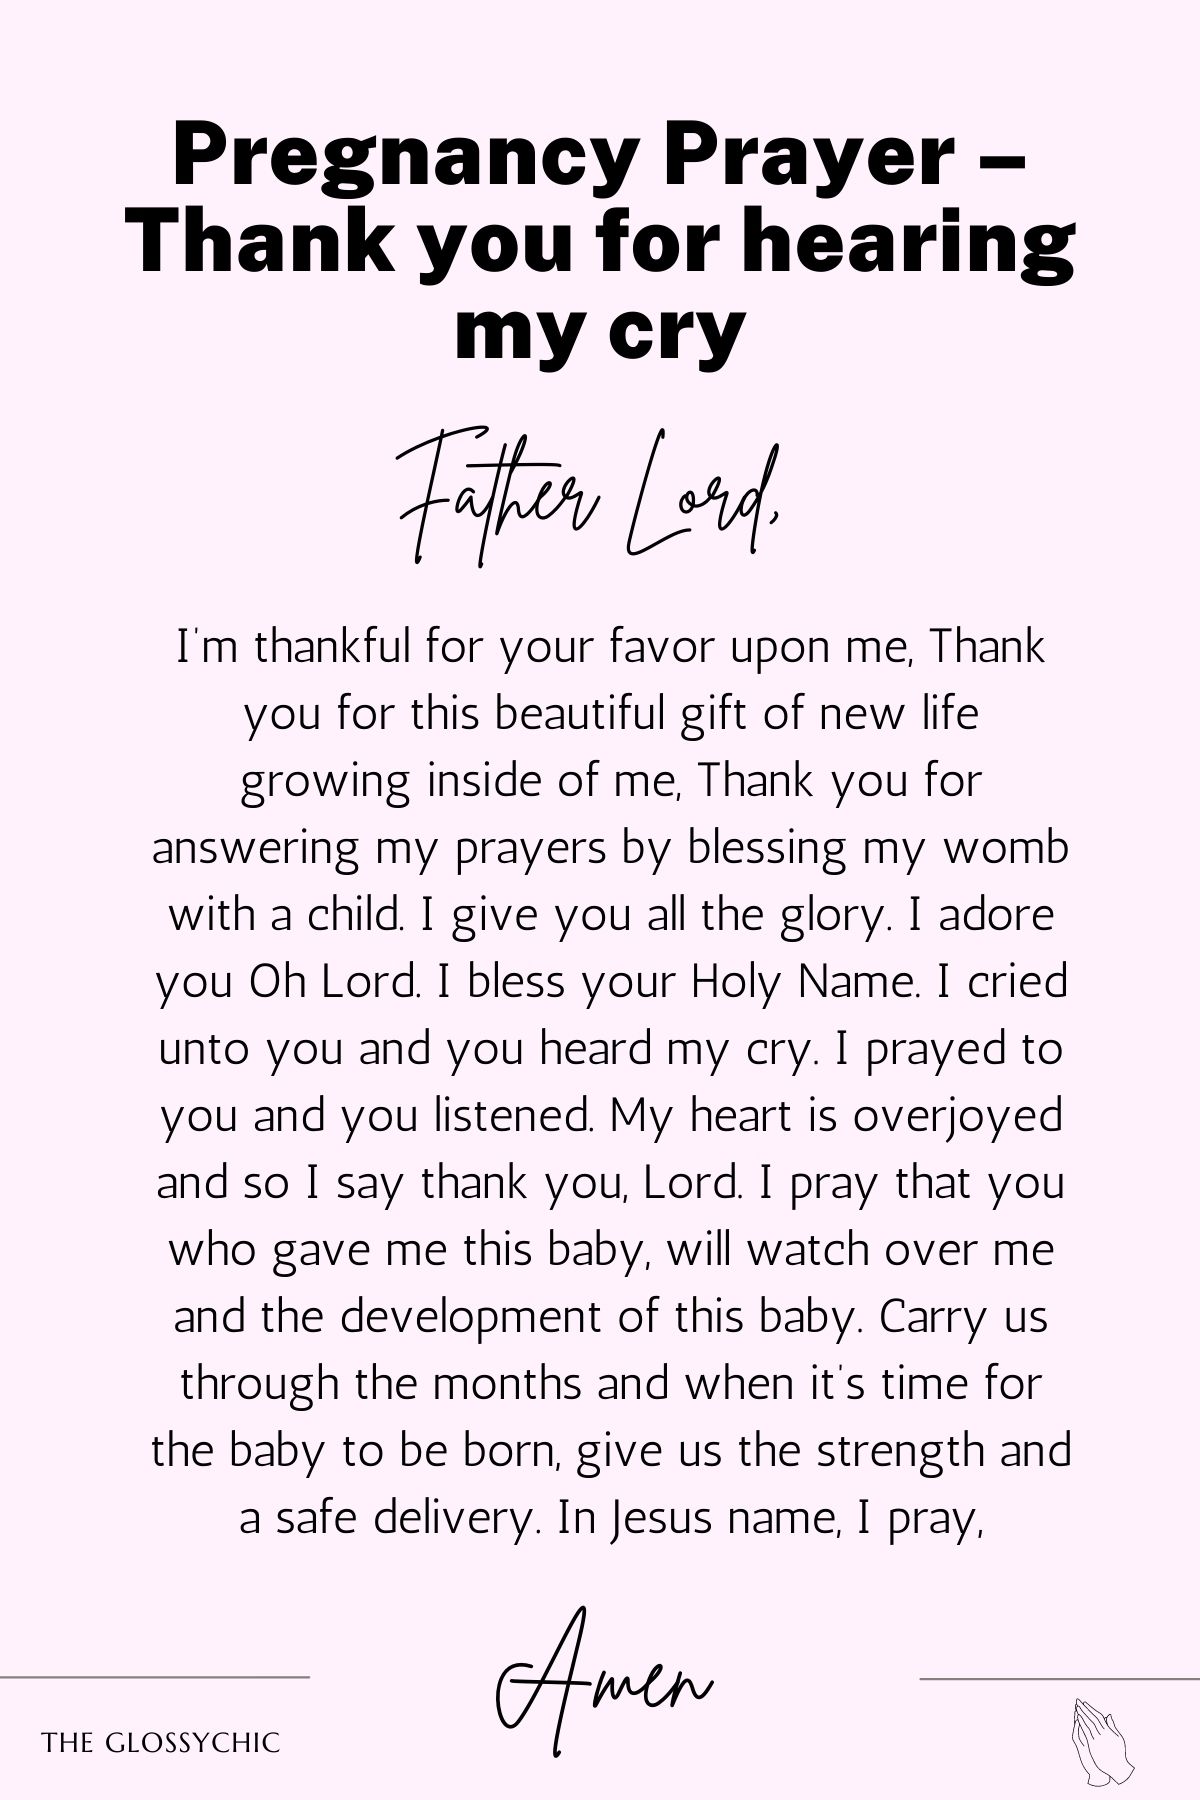 Pregnancy prayer – Thank you for hearing my cry